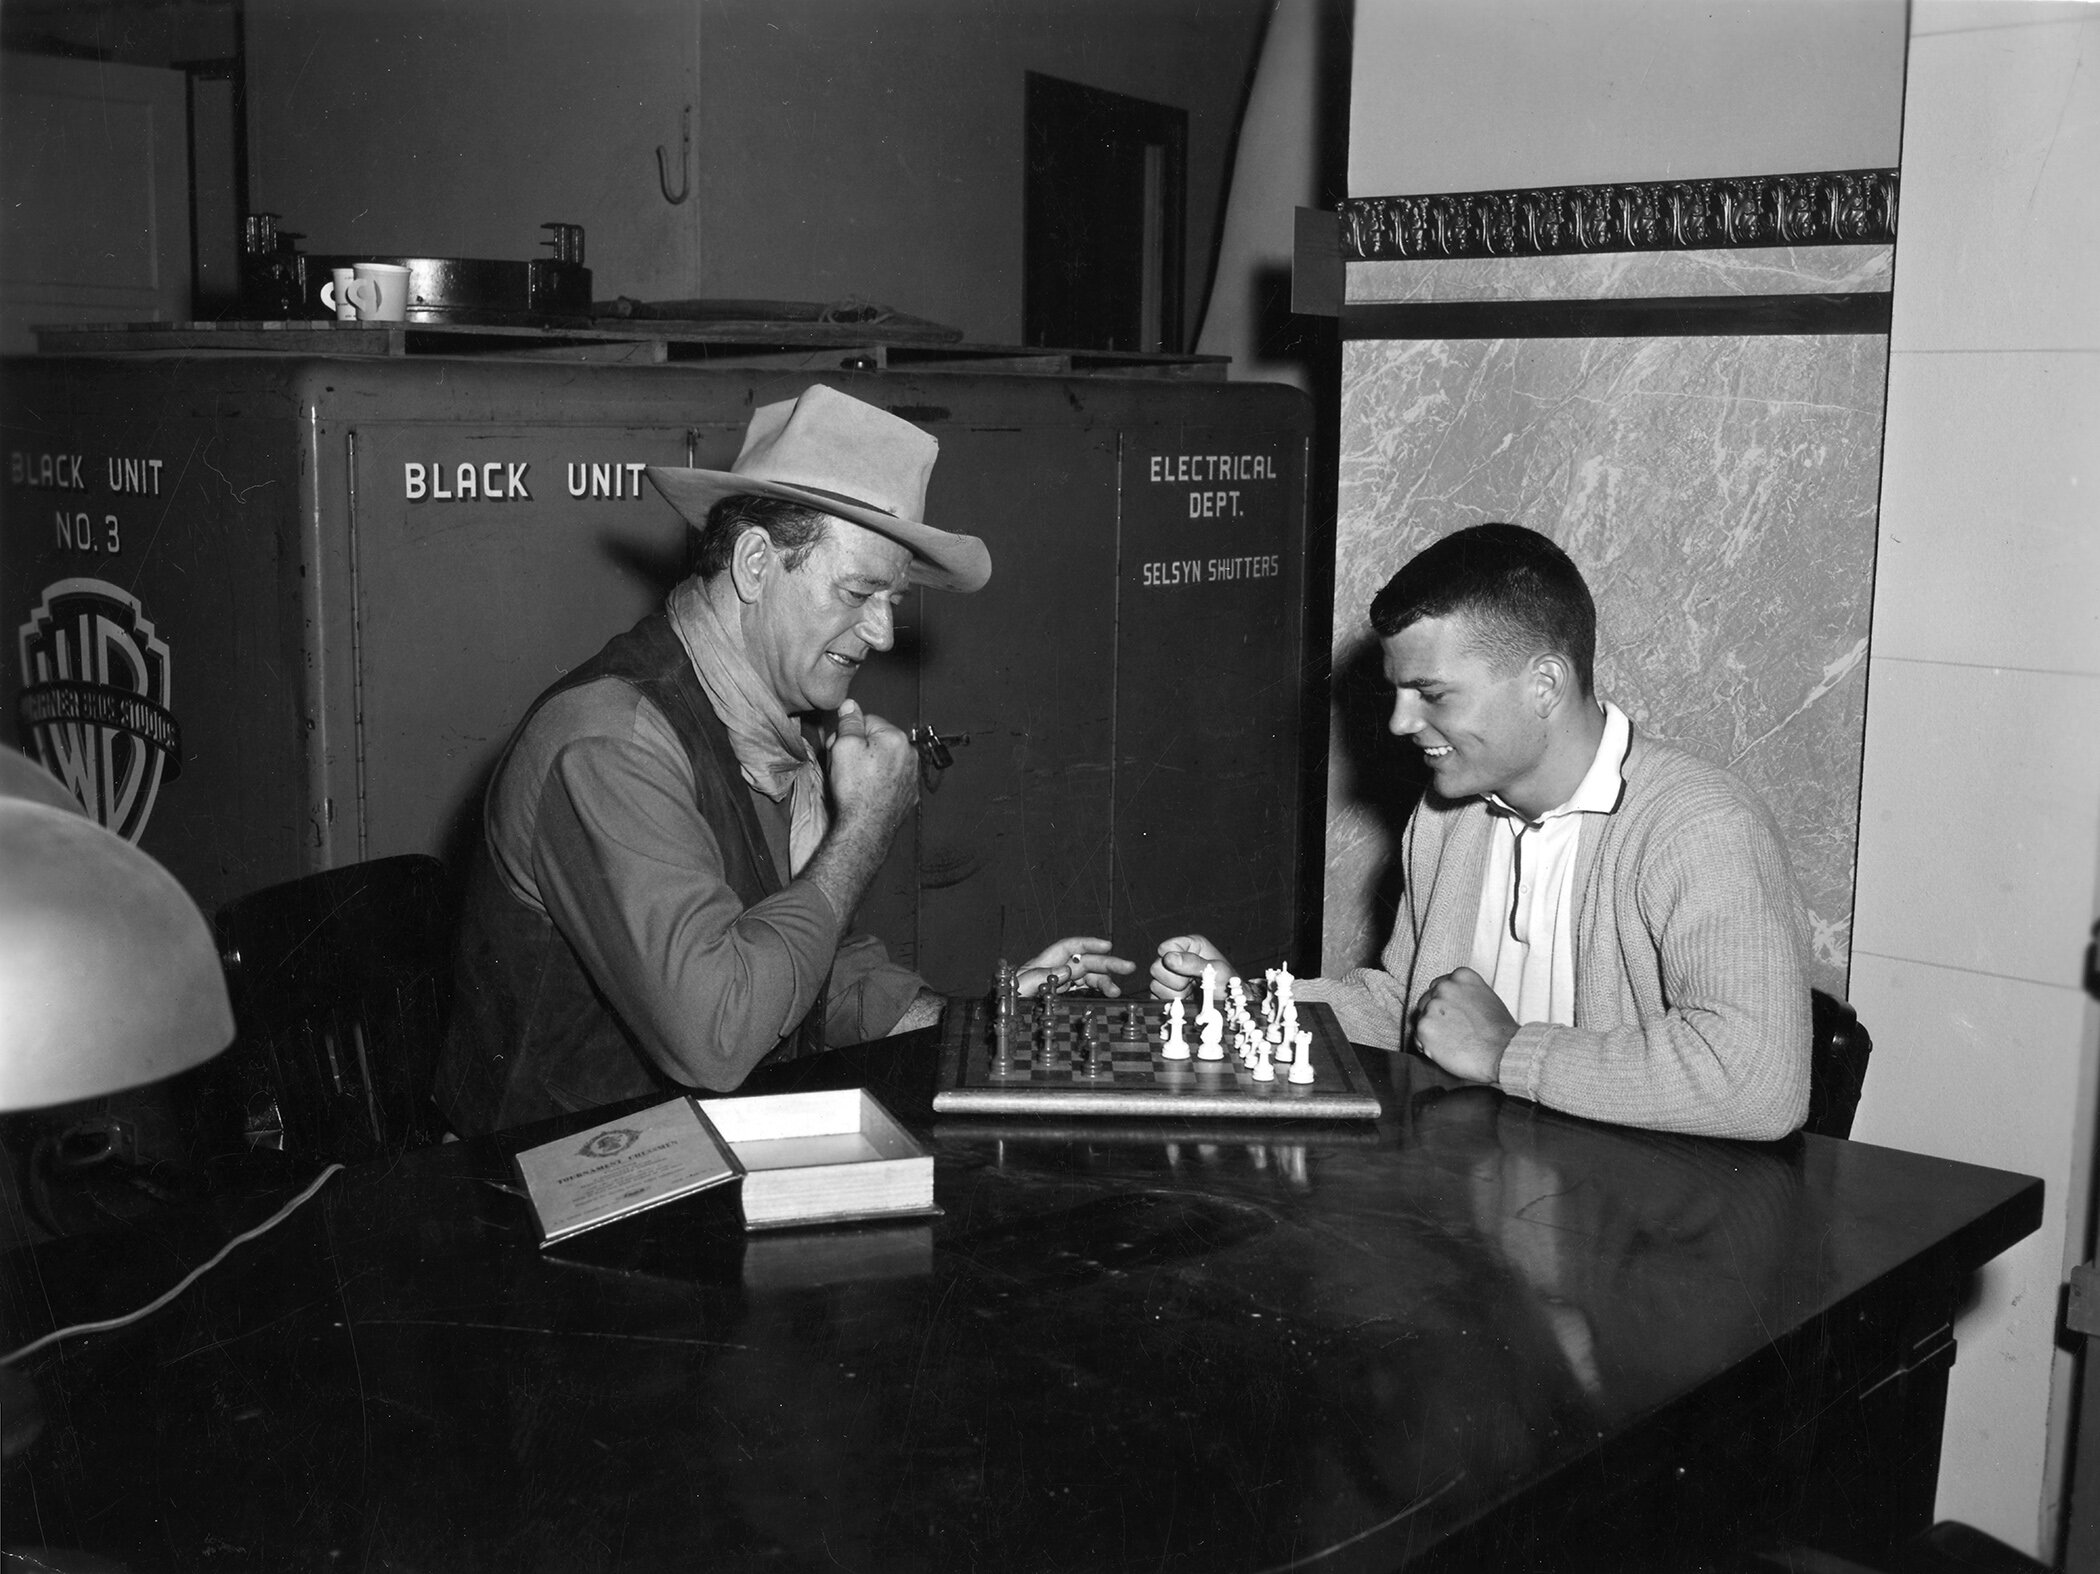 Patrick joins Duke in a game of chess around the time Rio Bravo was filmed. Here, John Wayne wears his signature neckerchief, vest, and cowboy hat often seen in his western films.